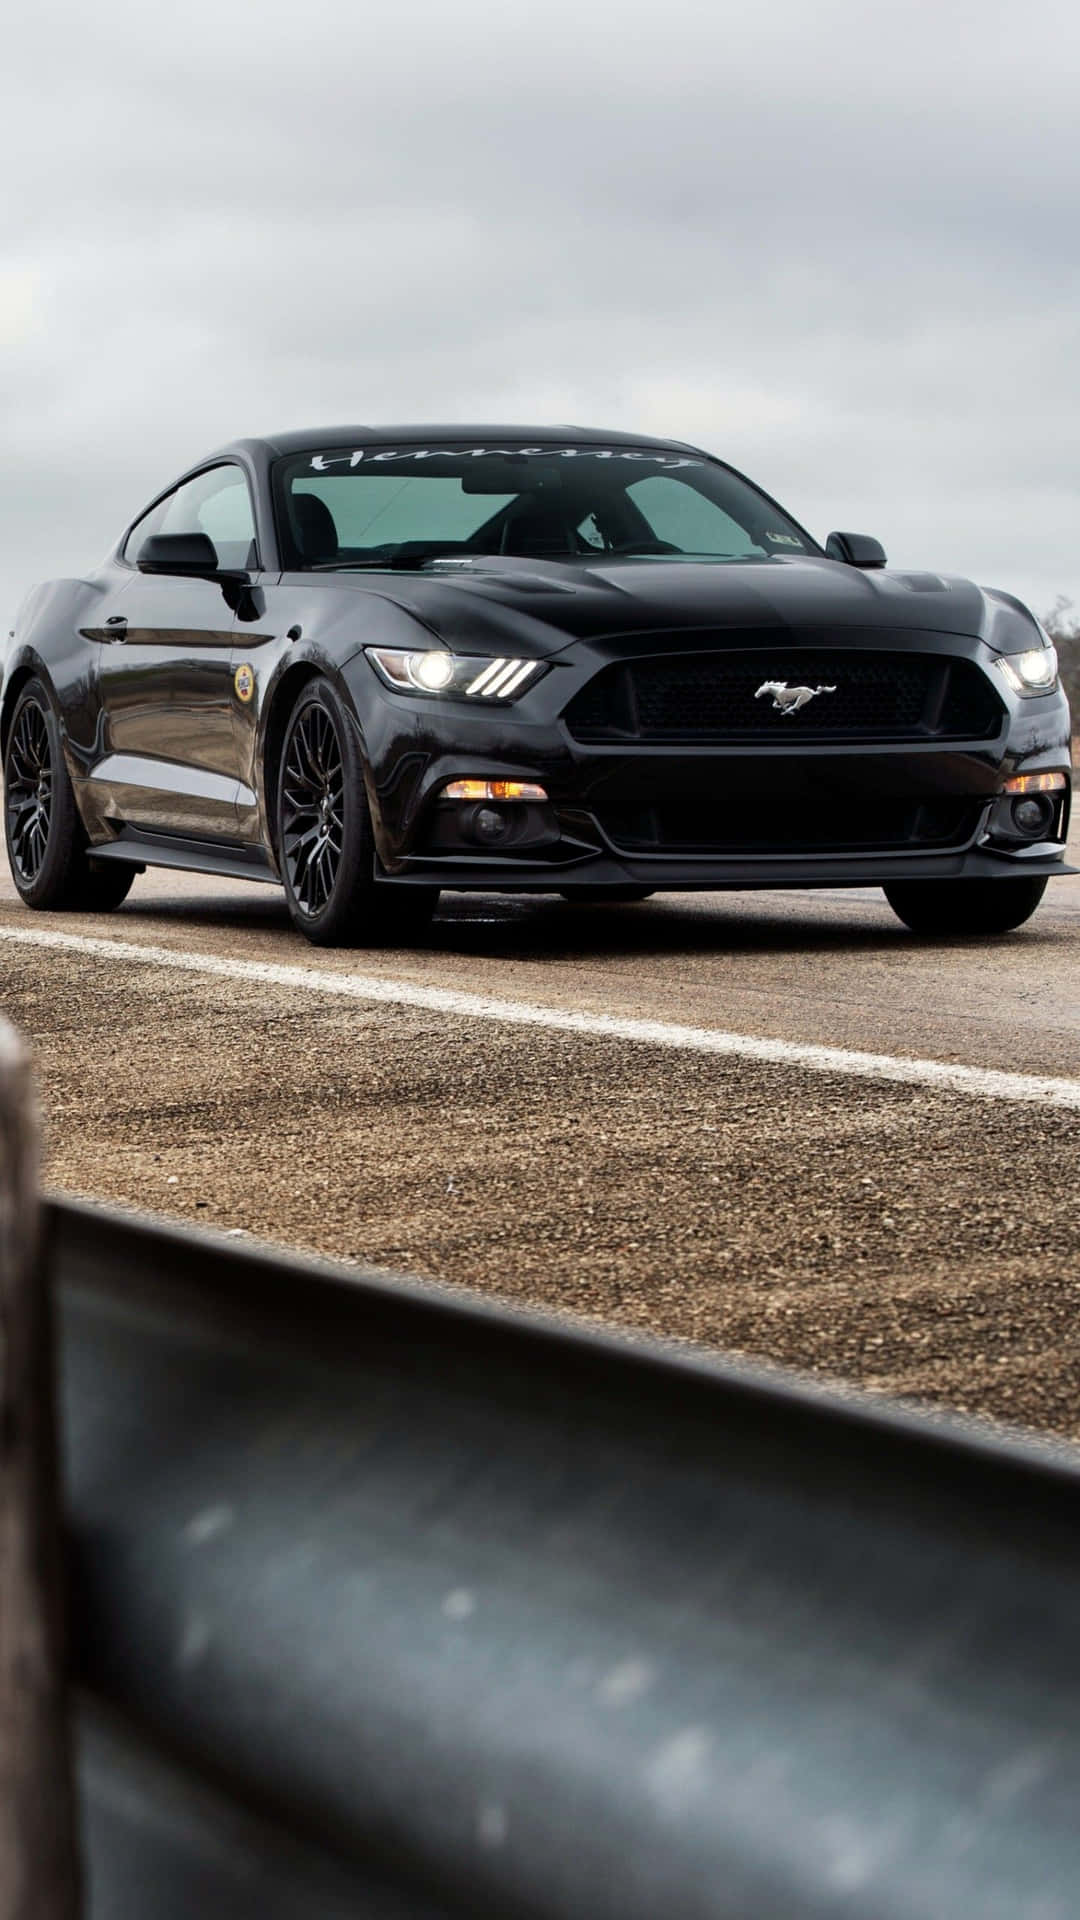 Get behind the wheel of your dream car with the Mustang iPhone Wallpaper